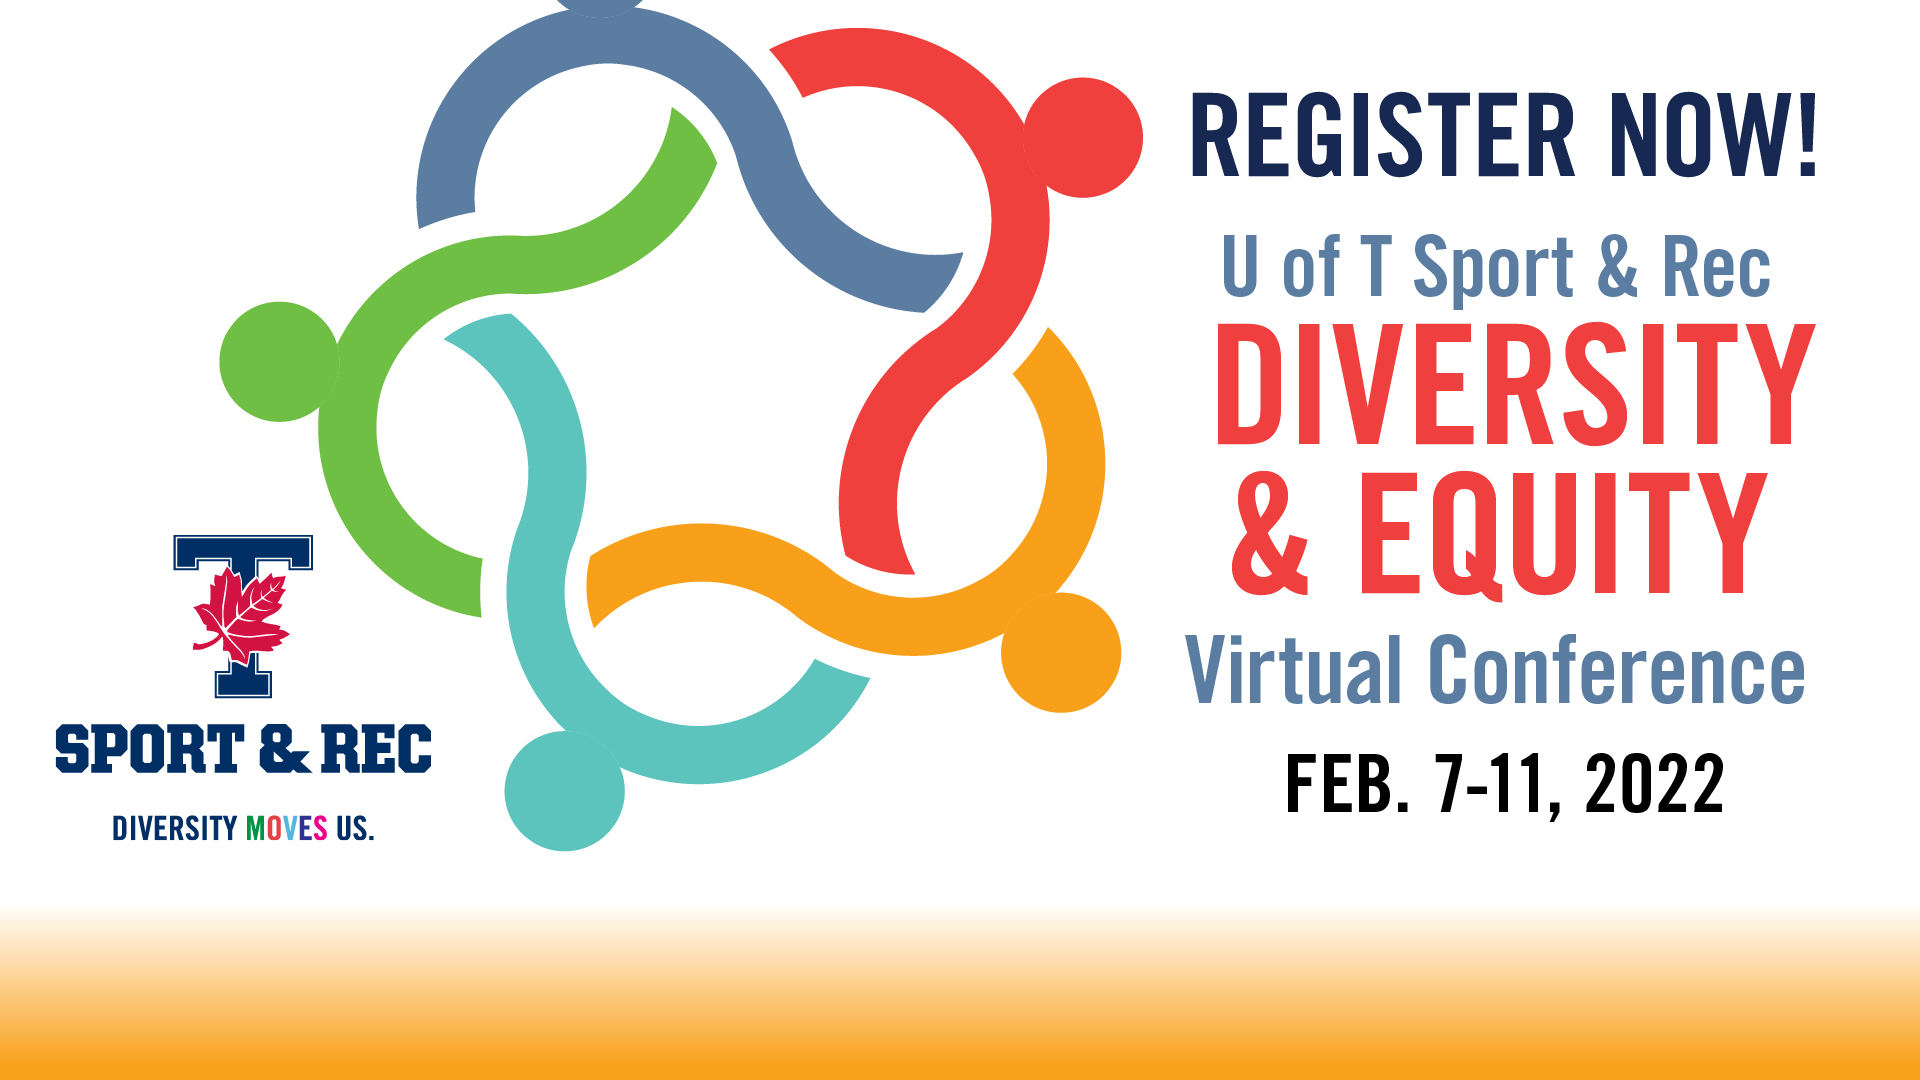 Banner for Diversity & Equity Conference, which reads: Register now for the 4th annual diversity & equity virtual conference, February 7-11, 2022